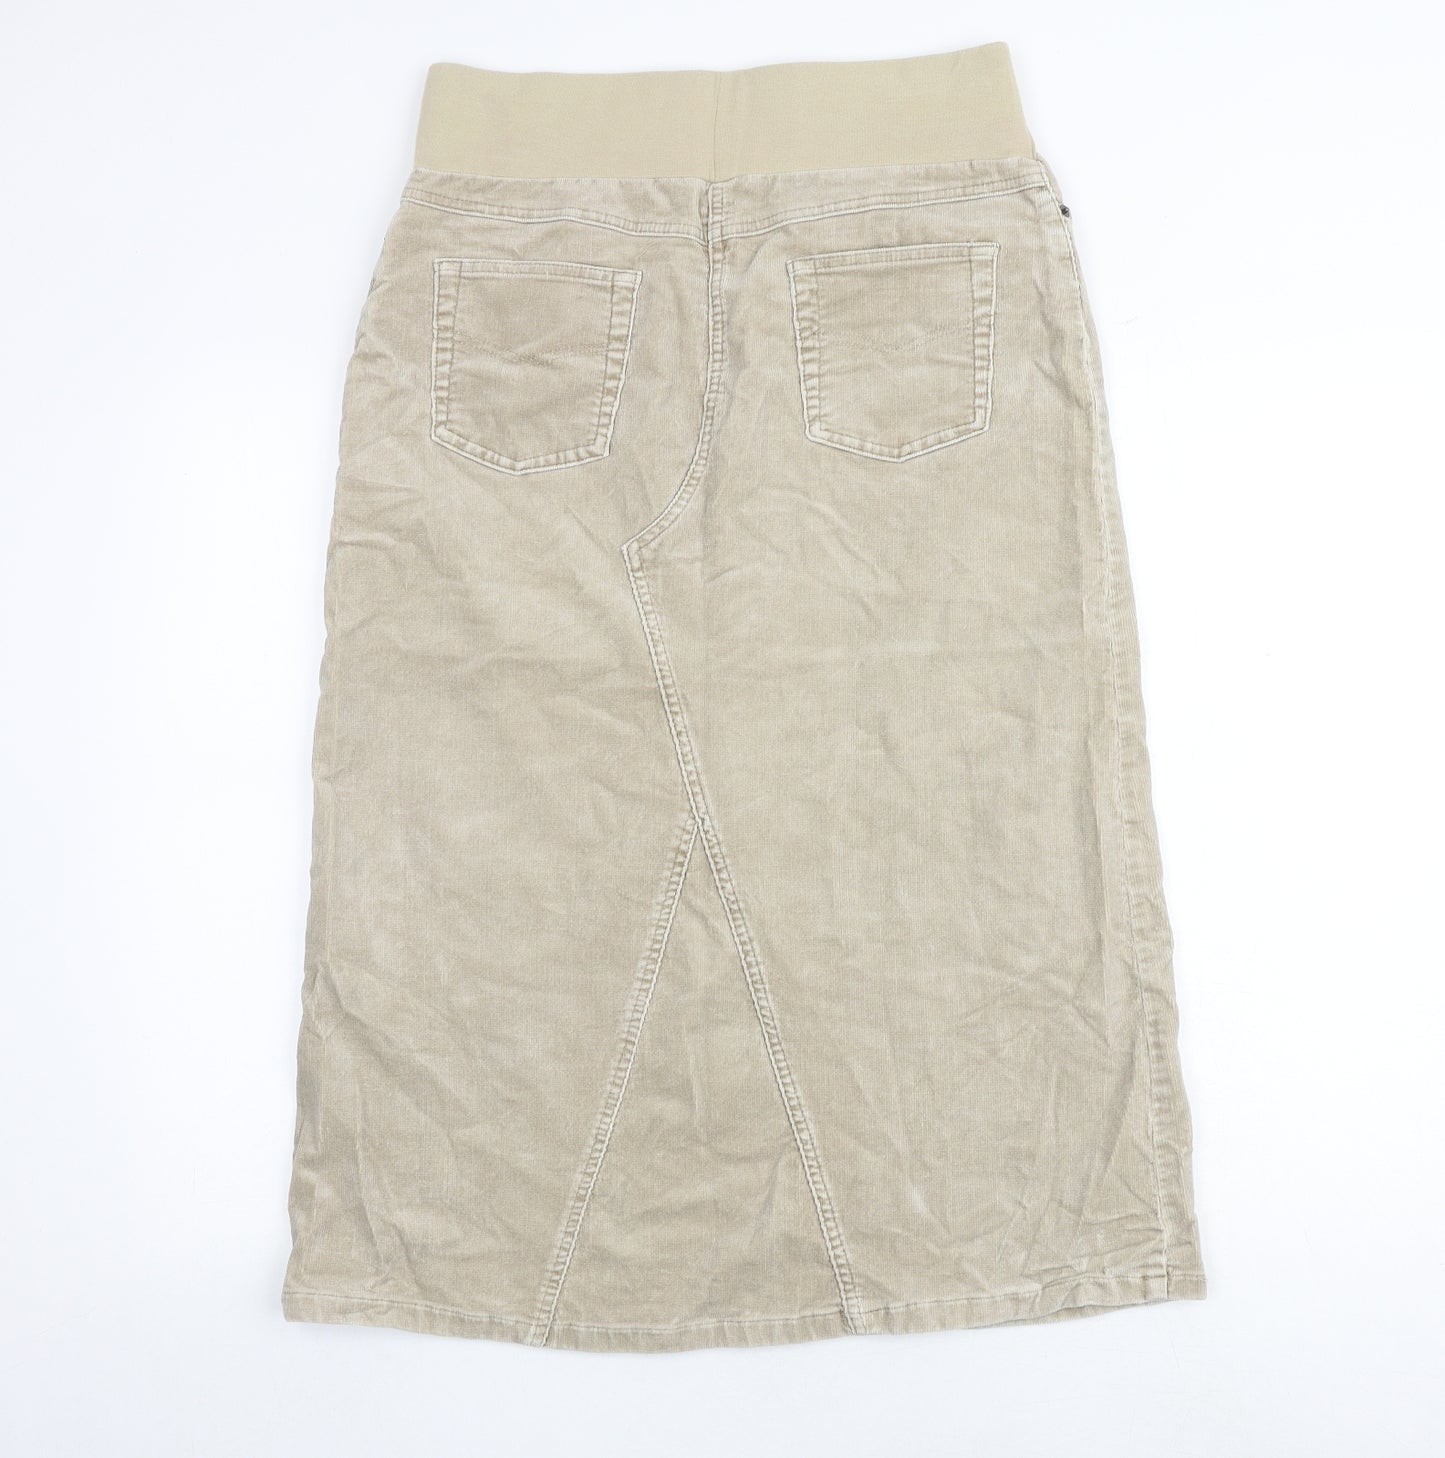 Blooming Marvellous Womens Beige Cotton A-Line Skirt Size 12